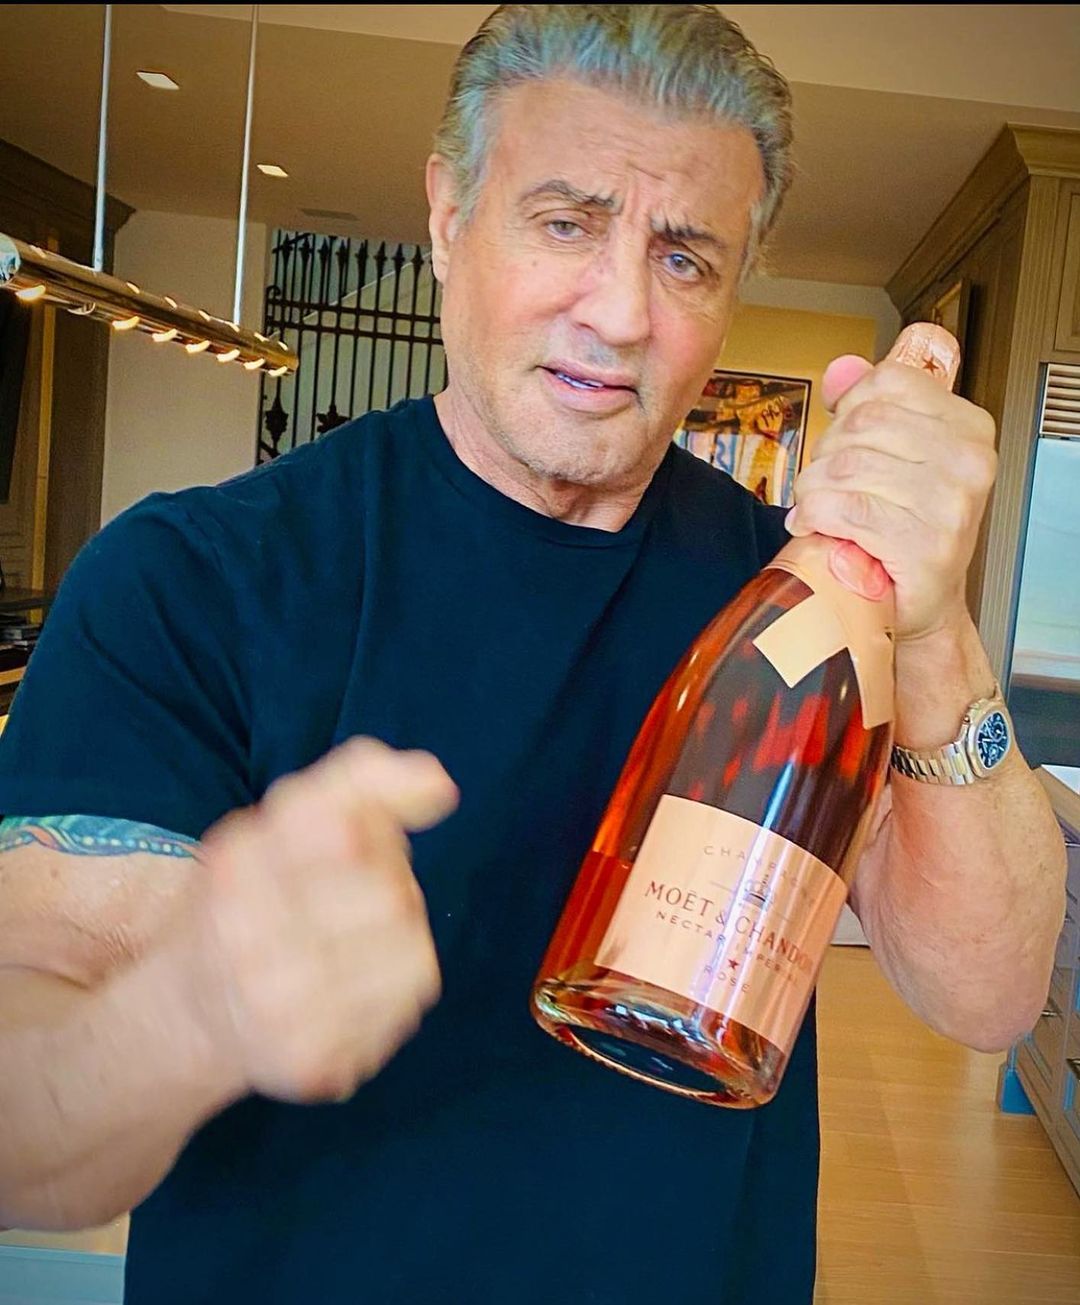 One of the top publications of @sylvester.stallone.fans which has 2.1K likes and 32 comments